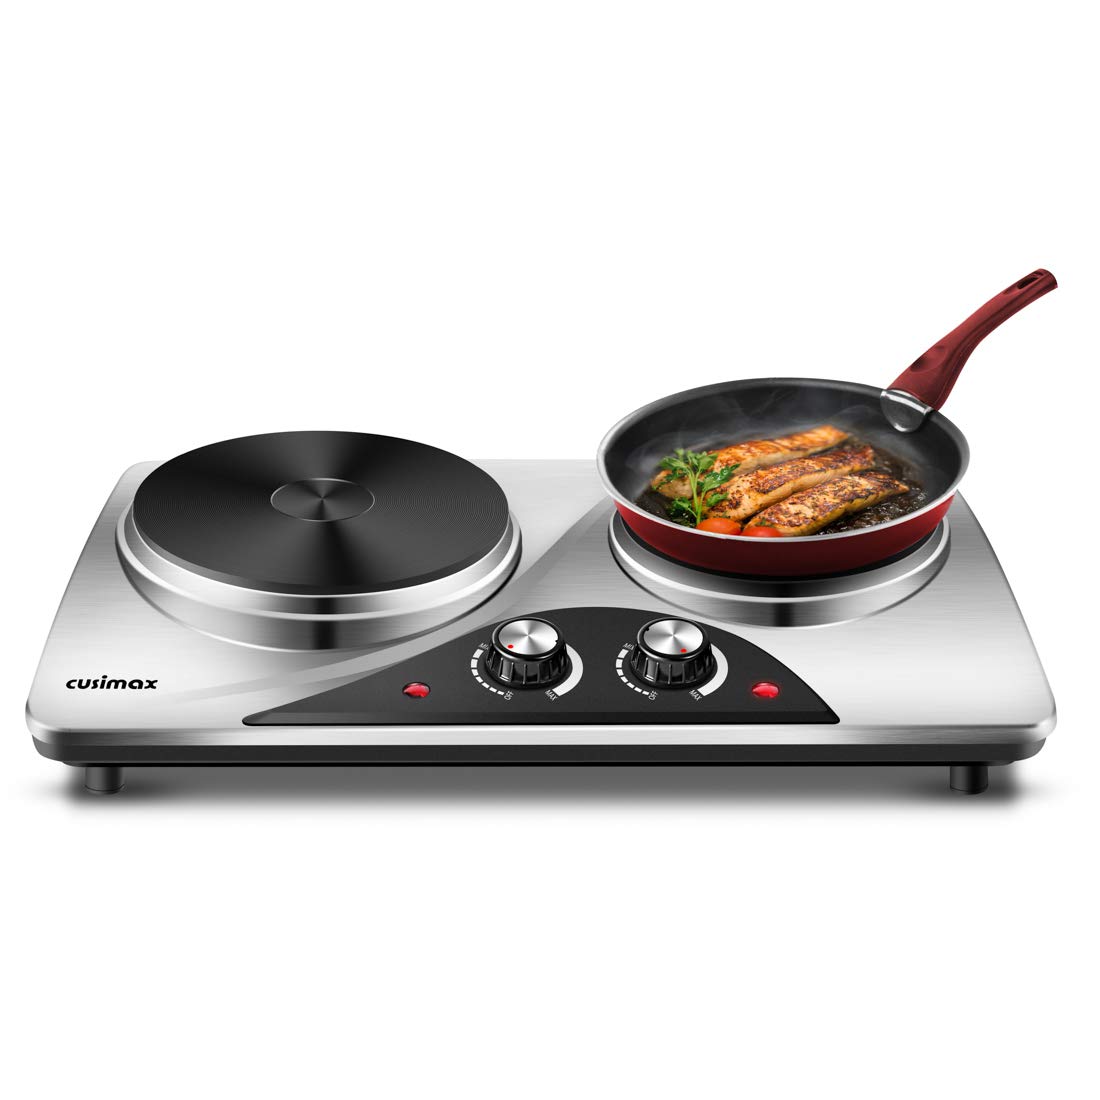 Cusimax 1800w Electric Double Hot Plate, Silver Infrared Stove